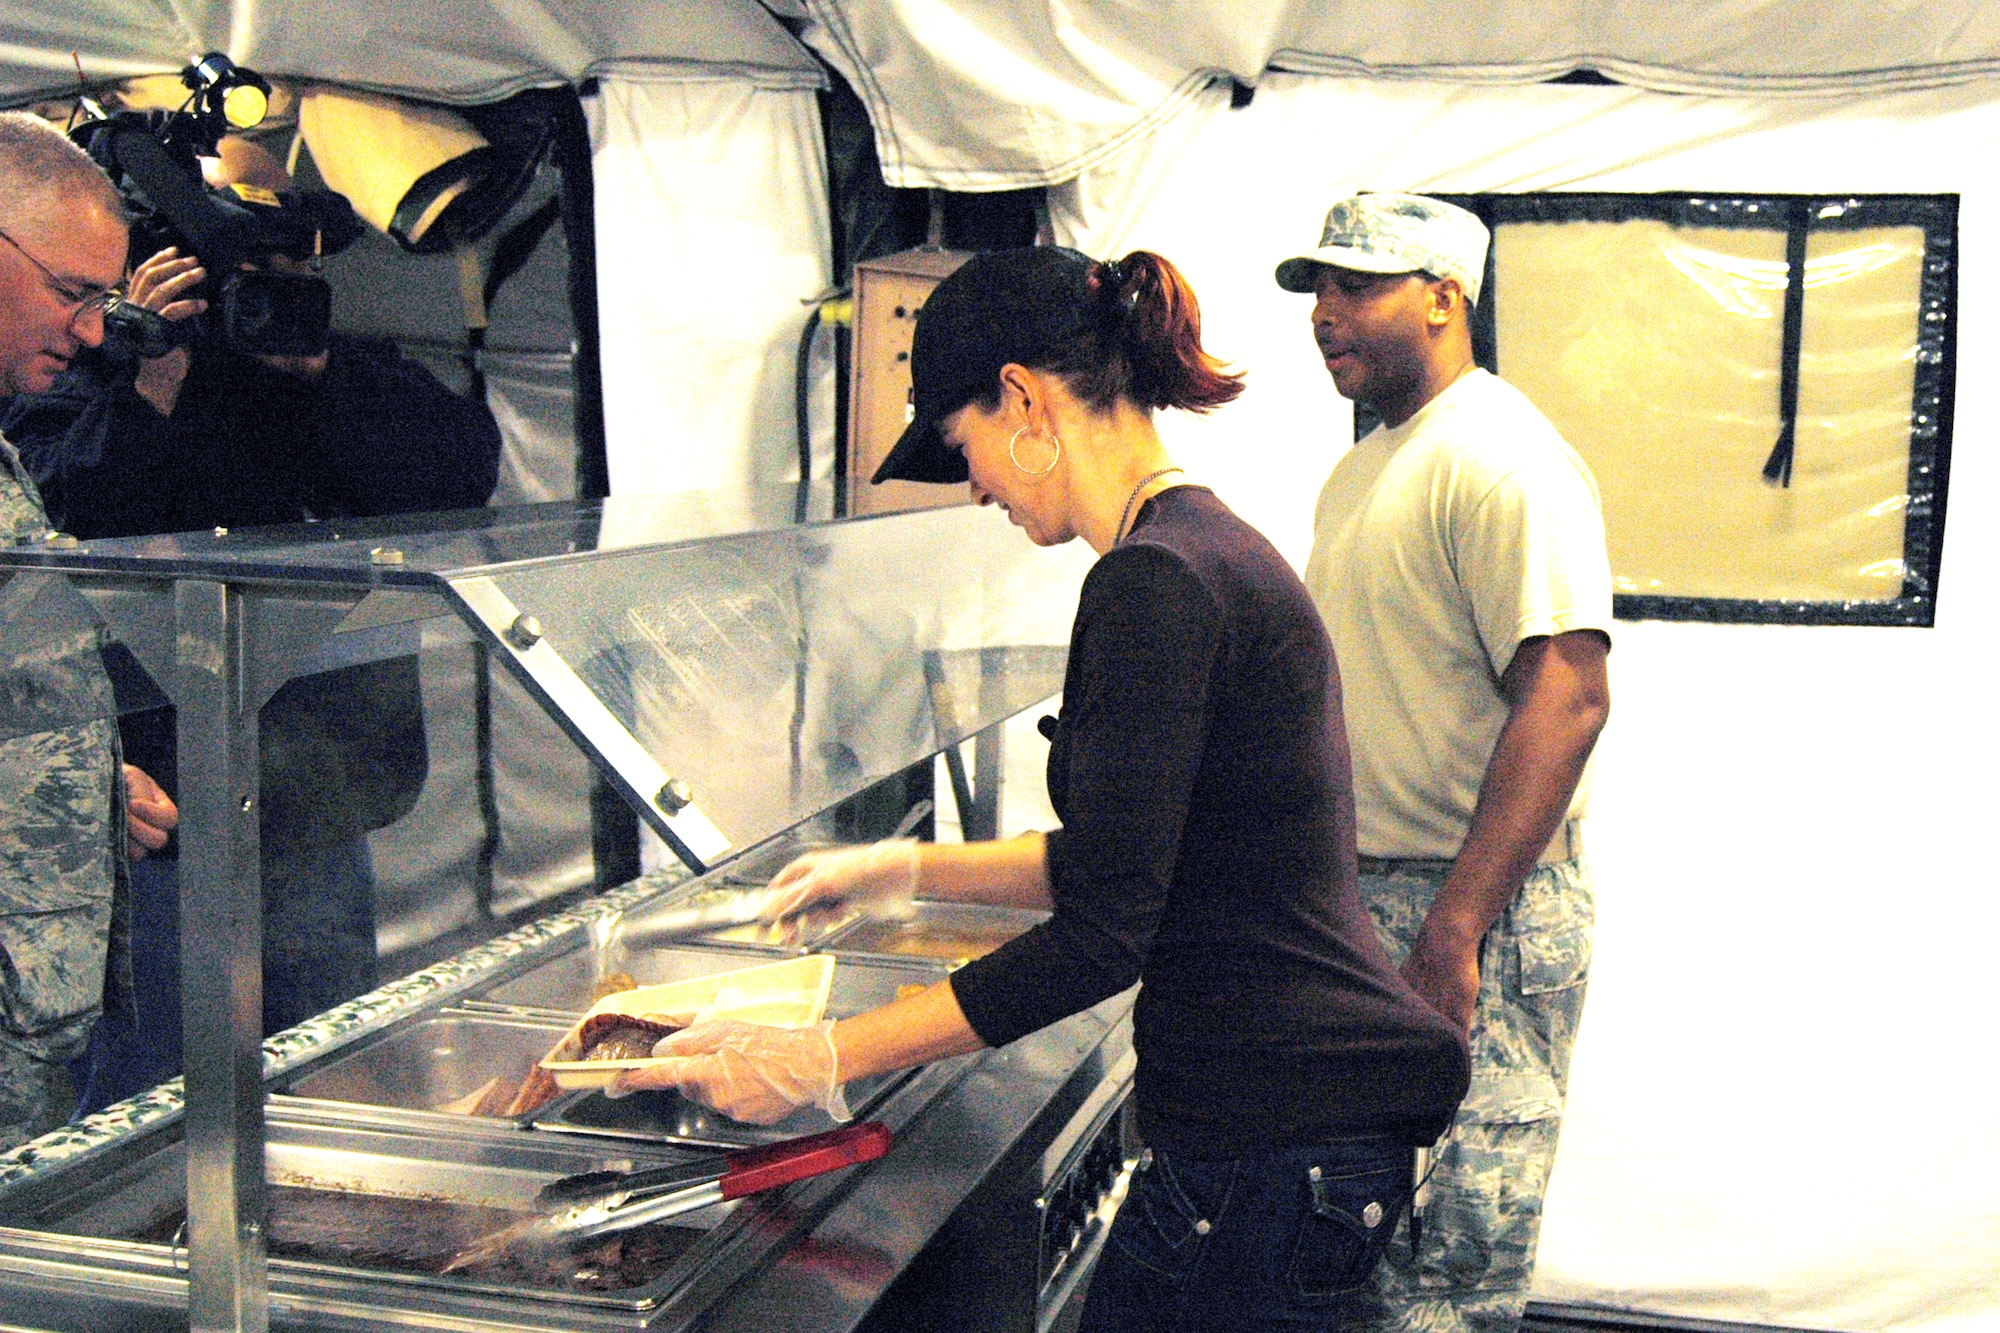 Ms. Dagmar Midcap, CBS46 reporter and chief meteorologist, tries her hand at serving Christmas dinner at the Air Force Reserve Command's Combat Services dining facility under the watchful eye of Tech. Sgt. Don Proctor, Services Combat instructor.  Air Force Services personnel are trained at the facility in preparation for field combat duty.  (U.S. Air Force photo/Master Sgt. Stan Coleman)  